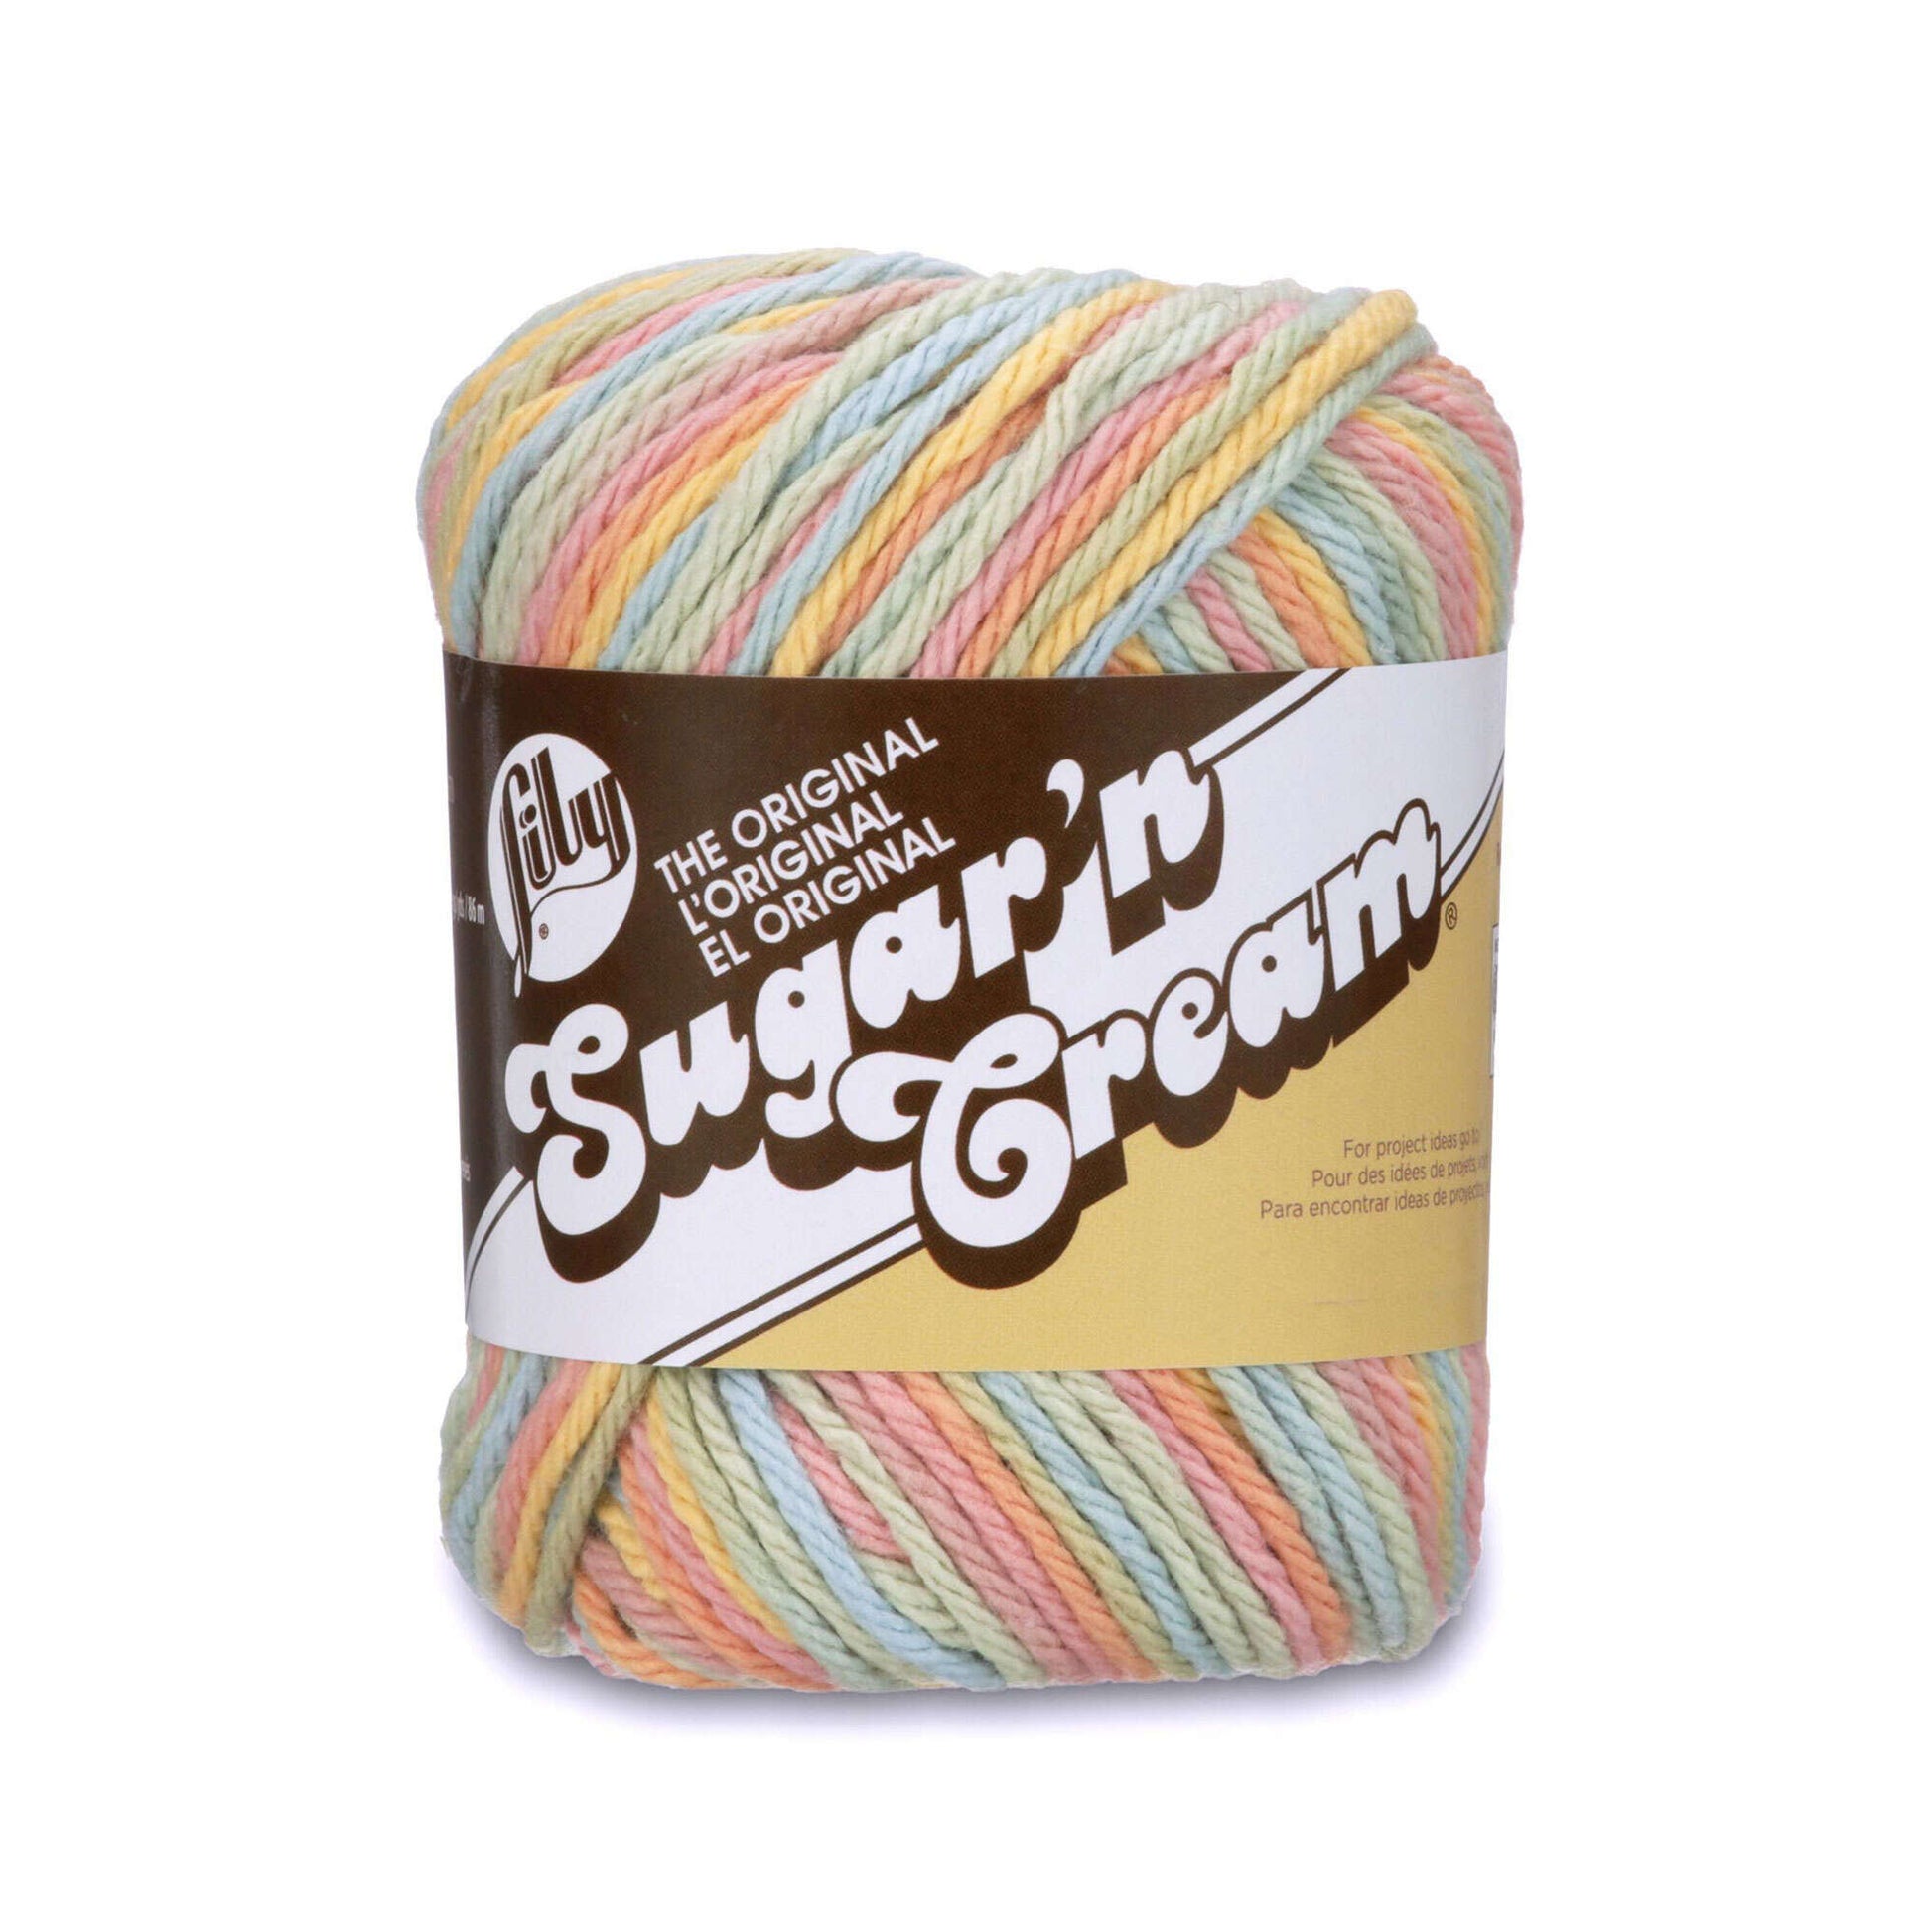 Lily Sugar'n Cream Ombres Yarn Butter Cream Ombre